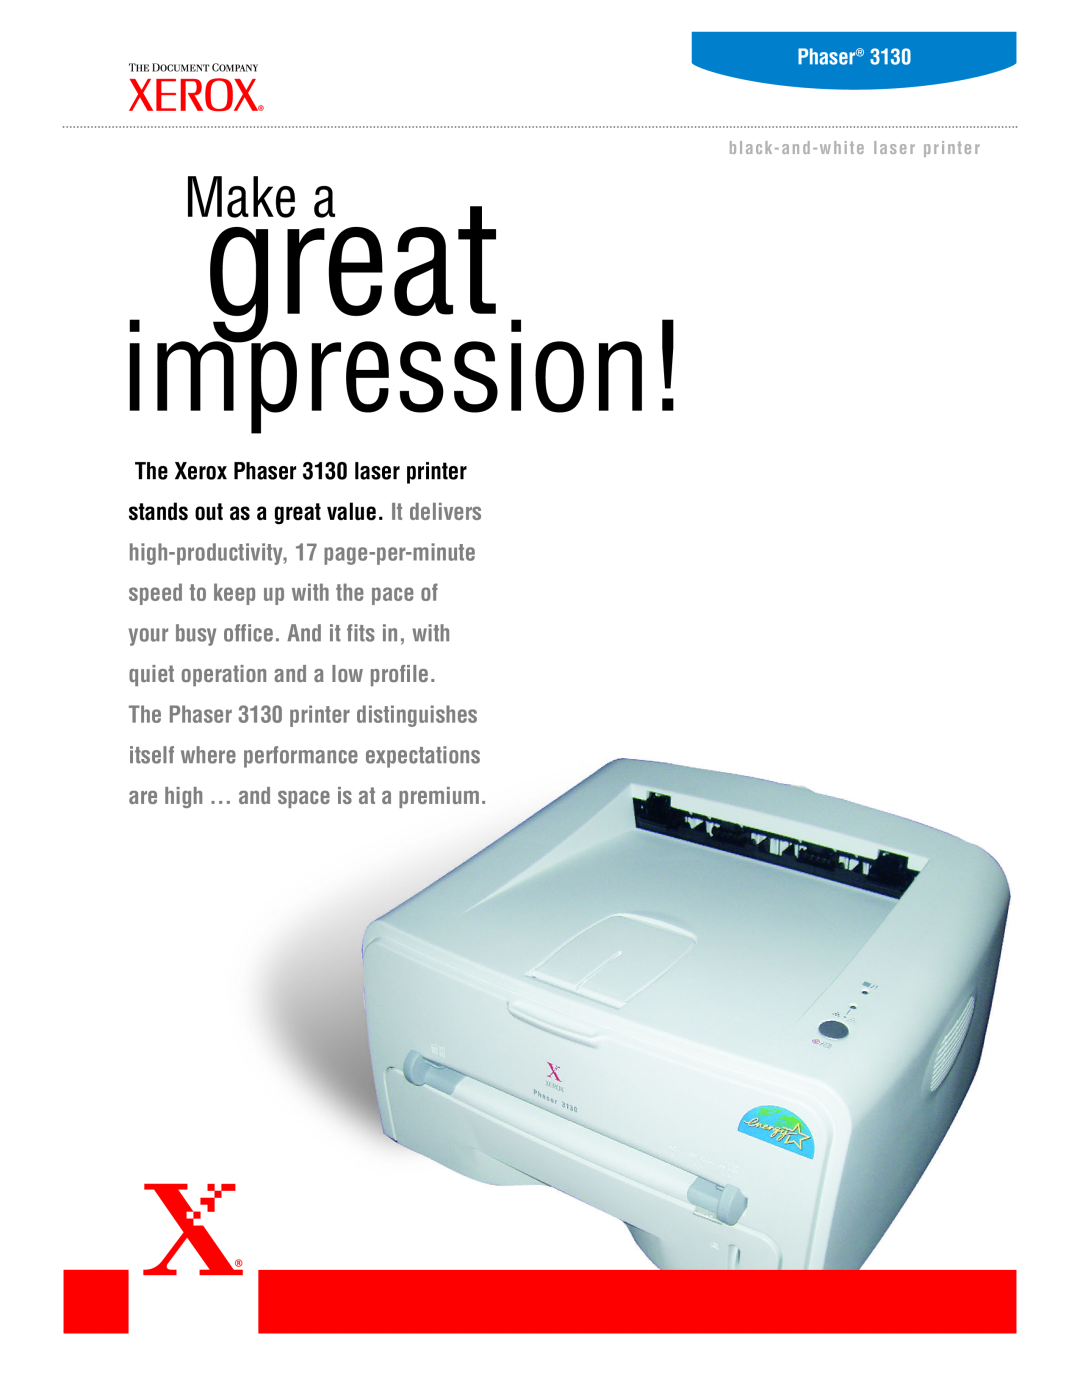 Xerox 3130 manual Phaser, great, impression, Make a, black-and-whitelaser printer 